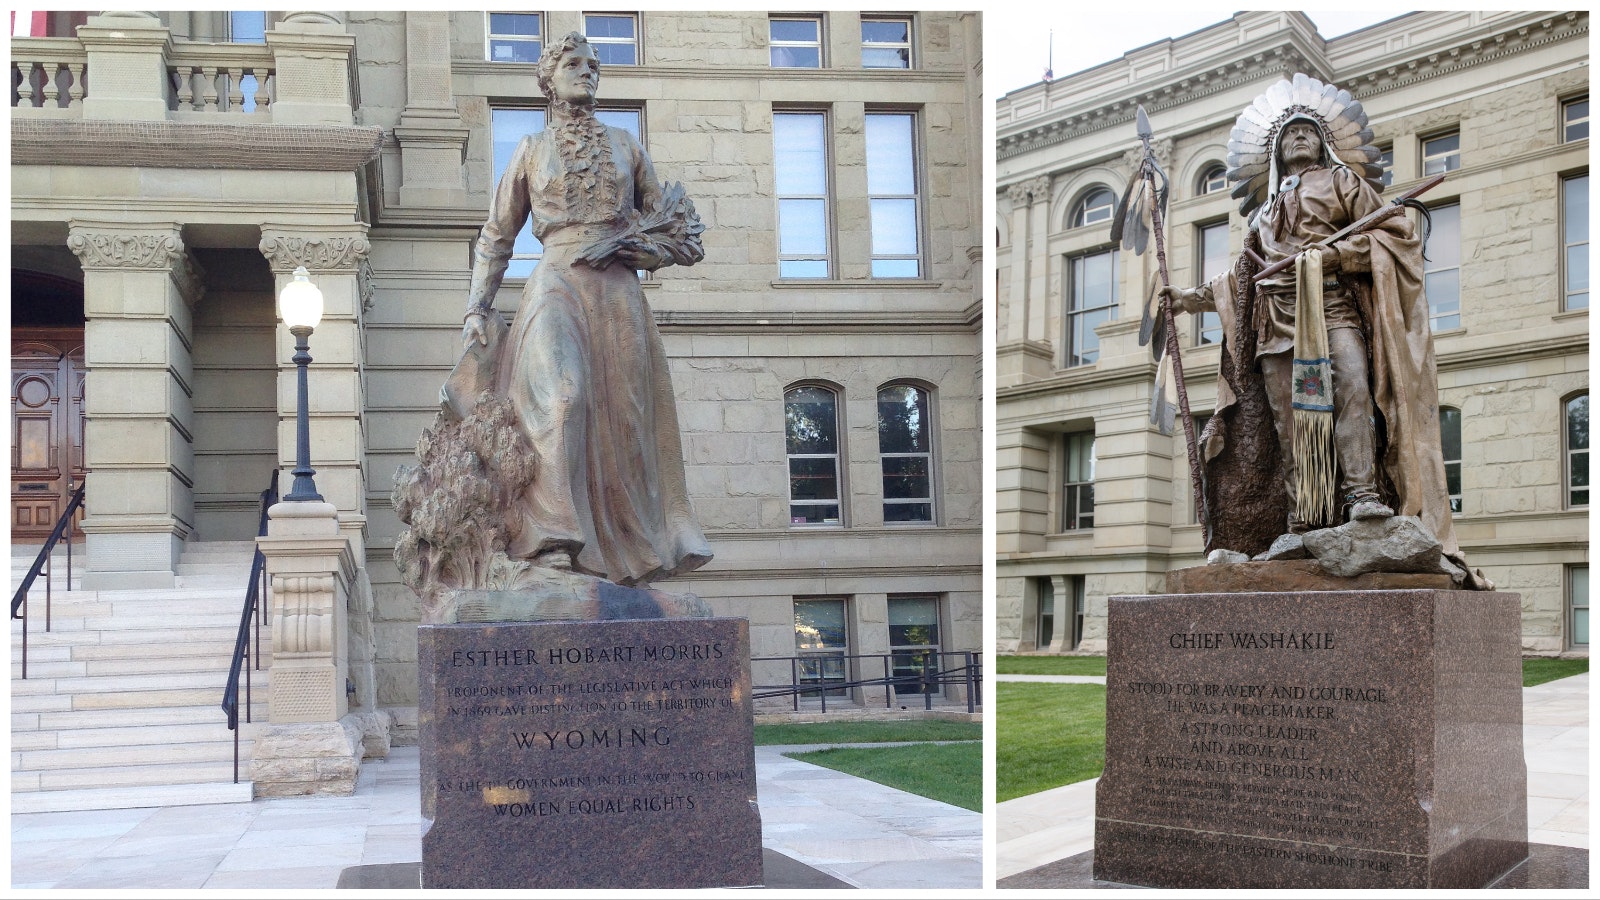 Sculptures of Esther Hobart Morris and Chief Washakie used to be featured prominently outside the Wyoming Capitol building in Cheyenne.